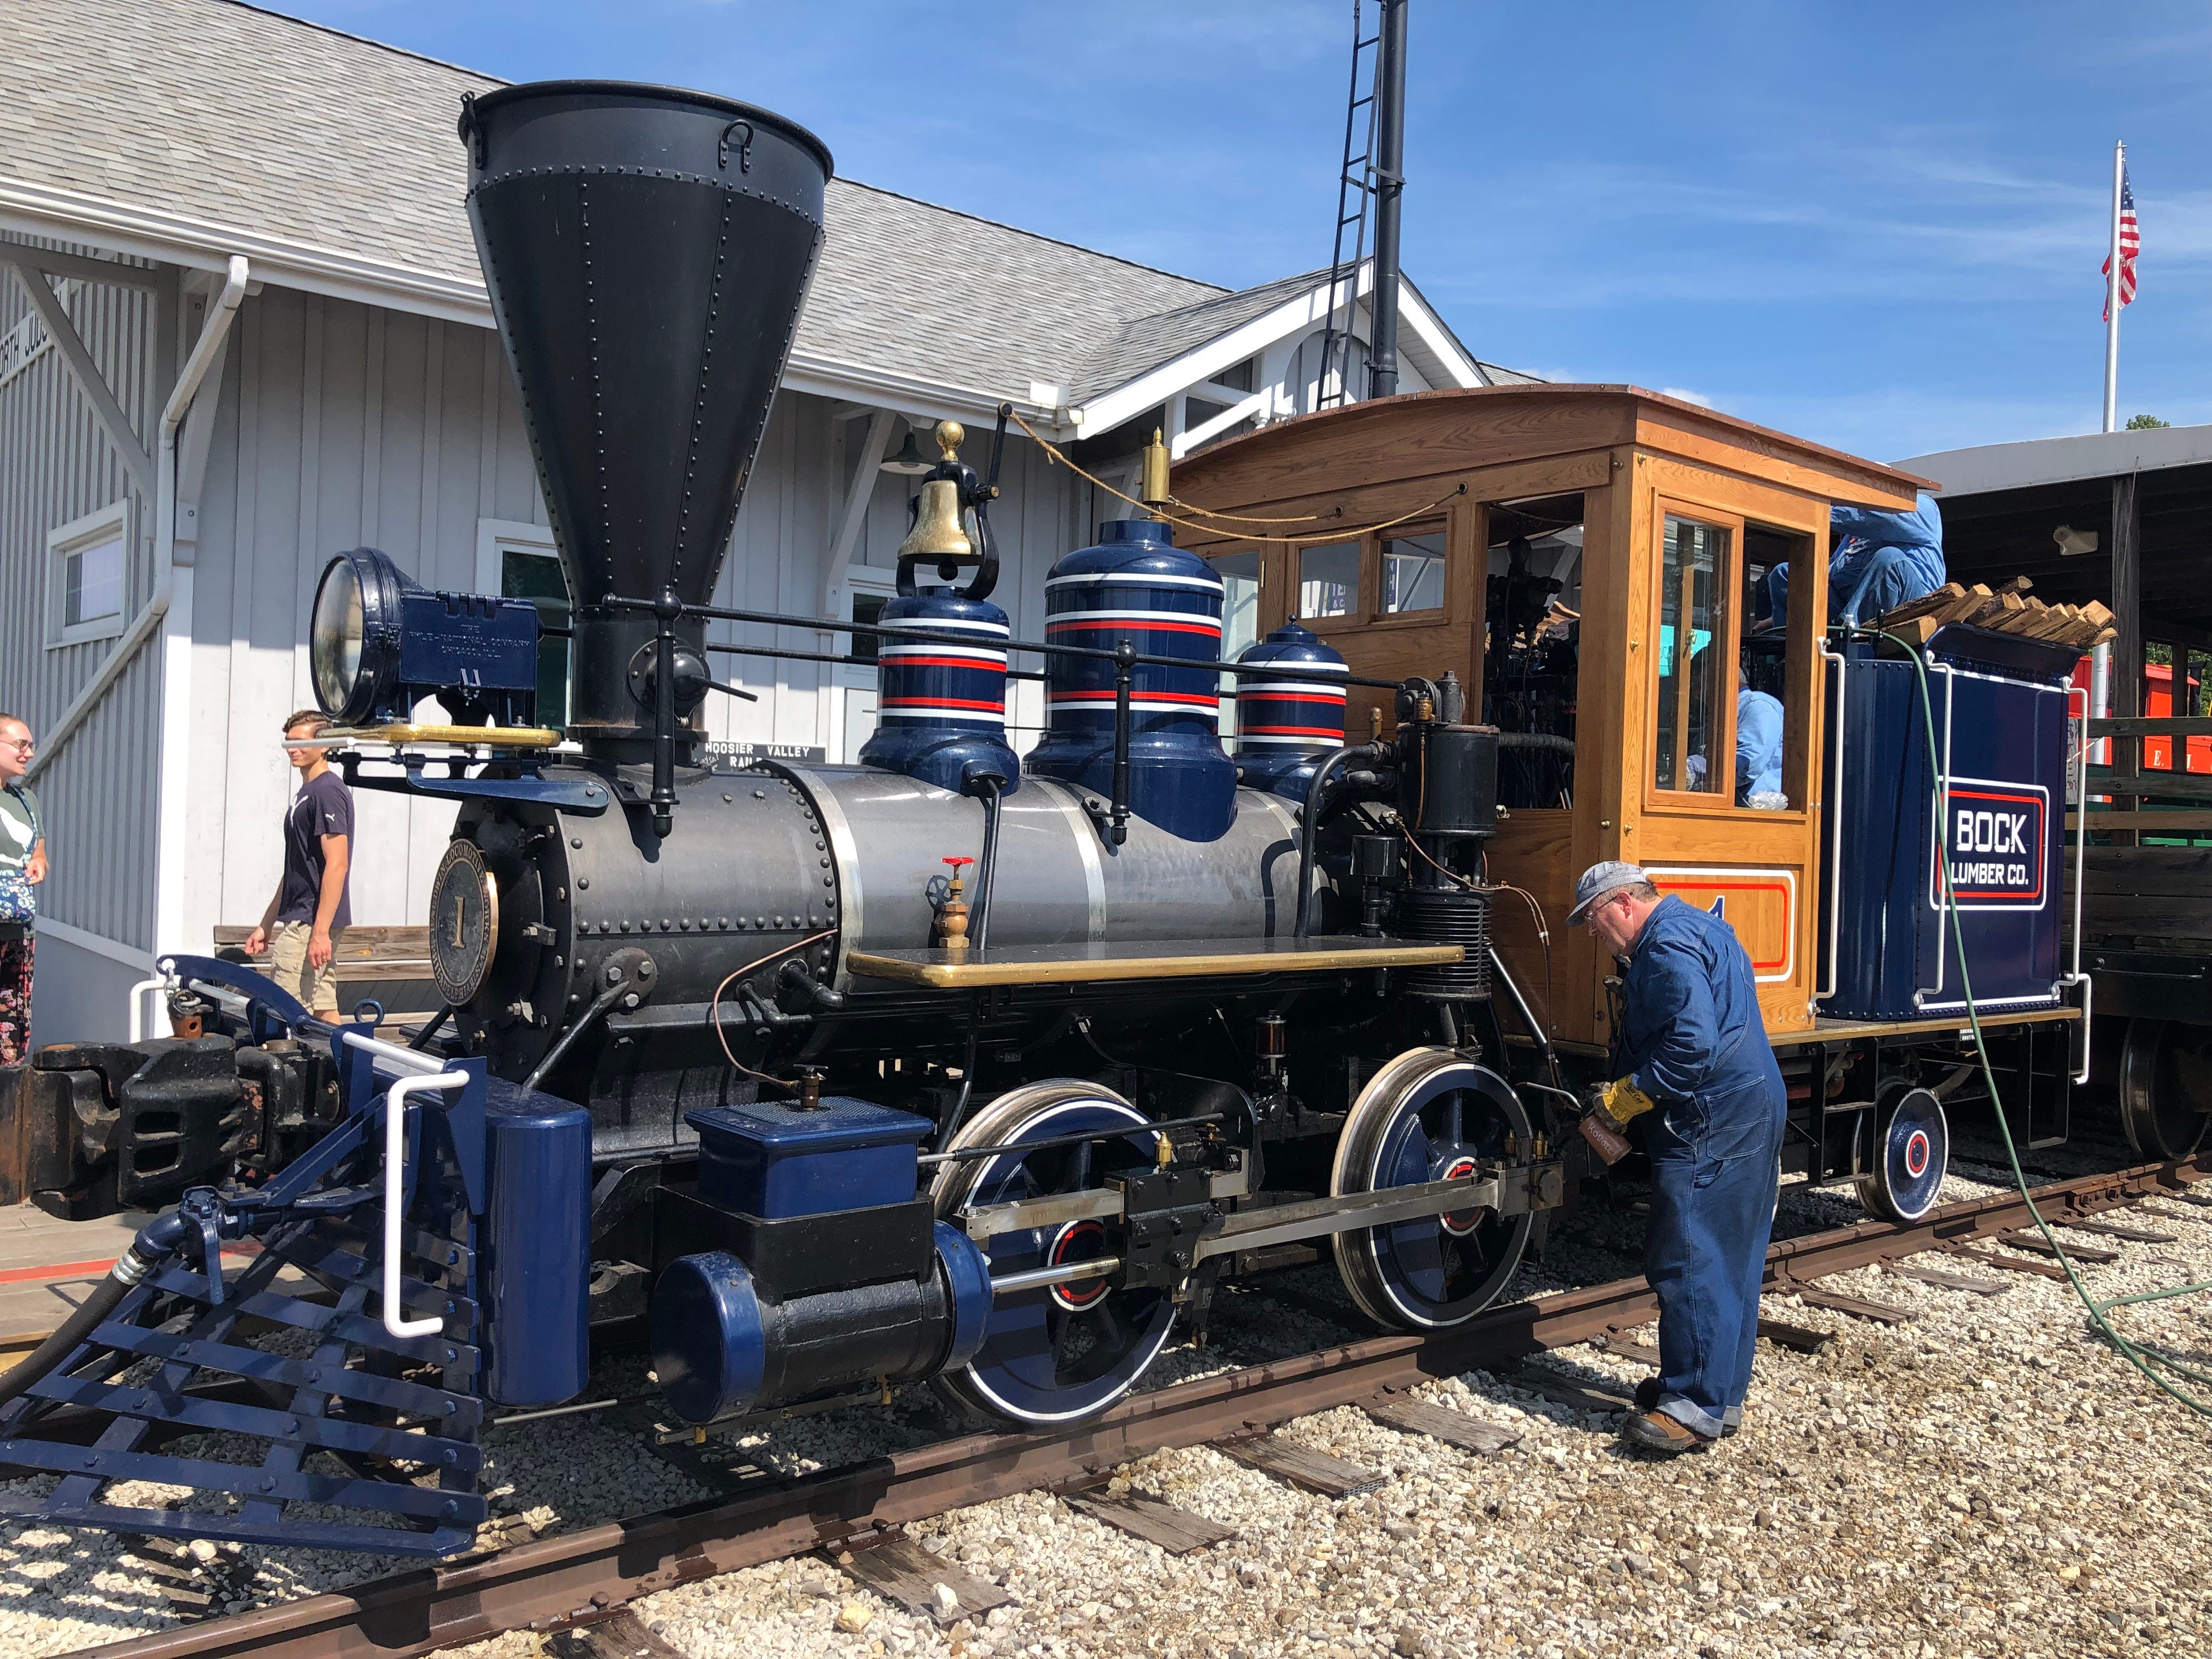 Hoosier Valley Railroad Museum in North Judson offers train rides